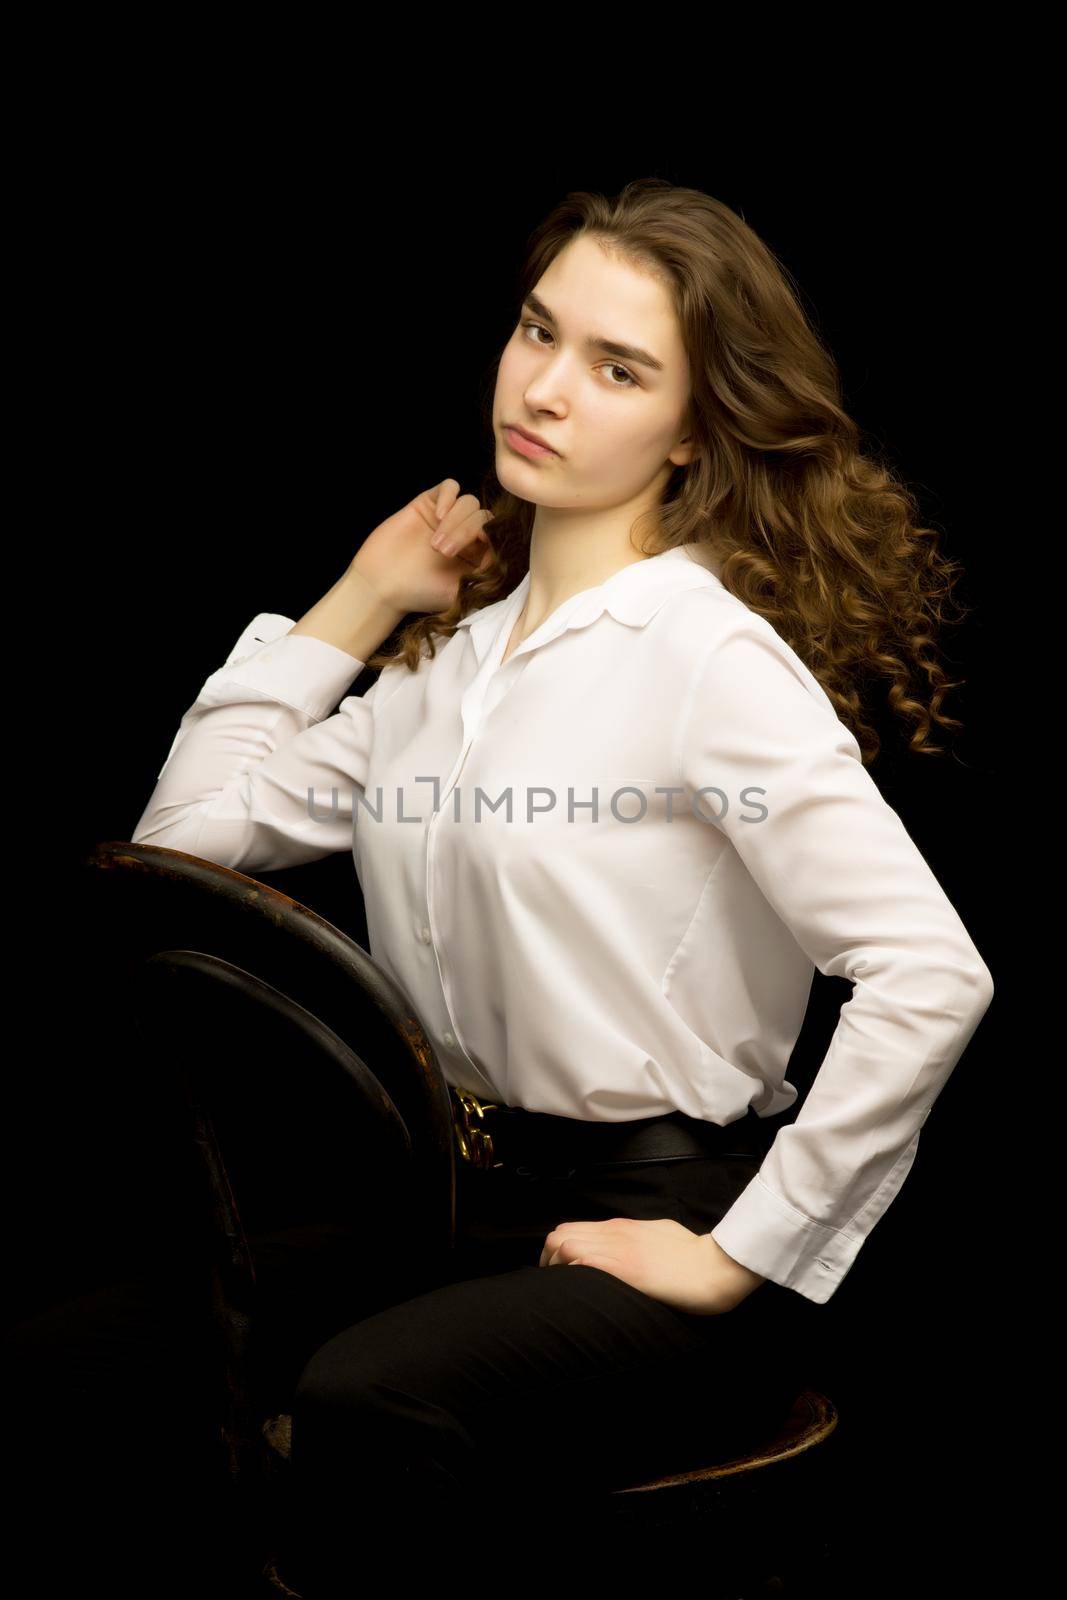 Beautiful, fashionable girl teenager studio photo on a black background. The concept of style and fashion layout for the magazine.